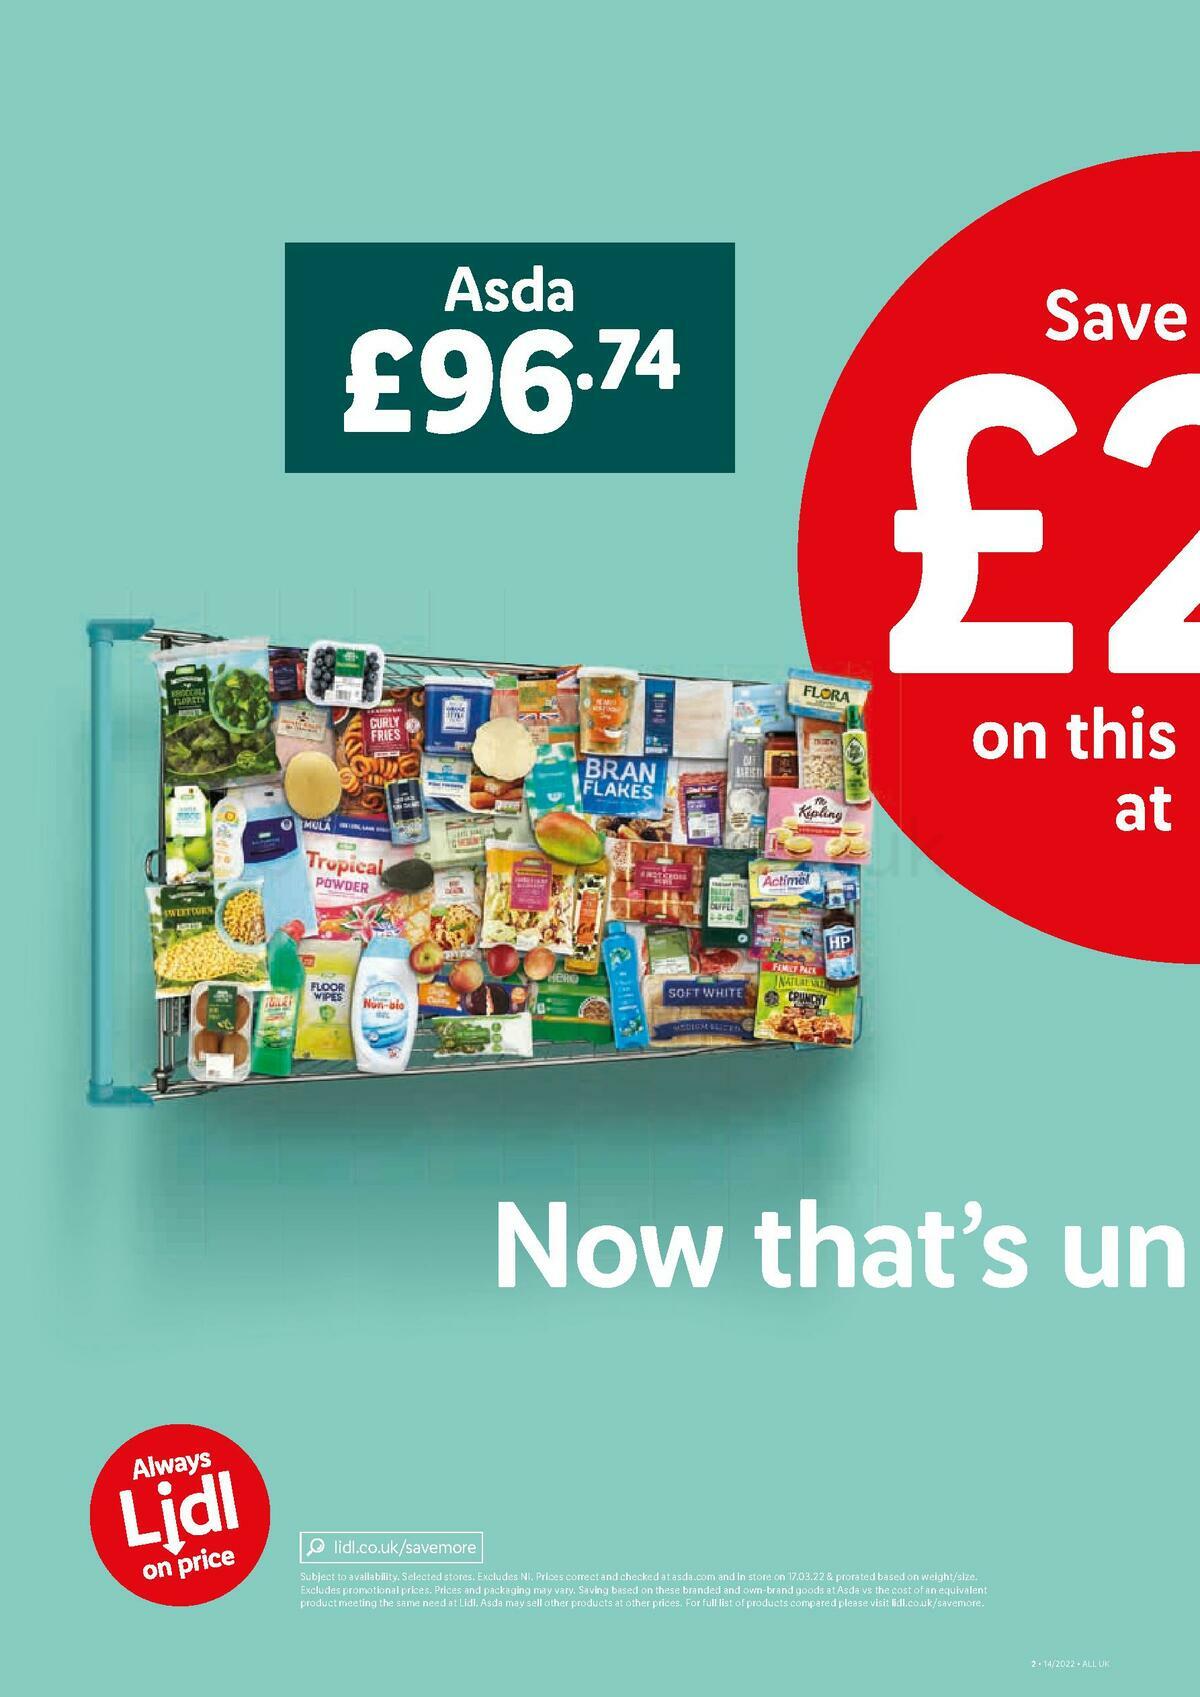 LIDL Offers from 7 April